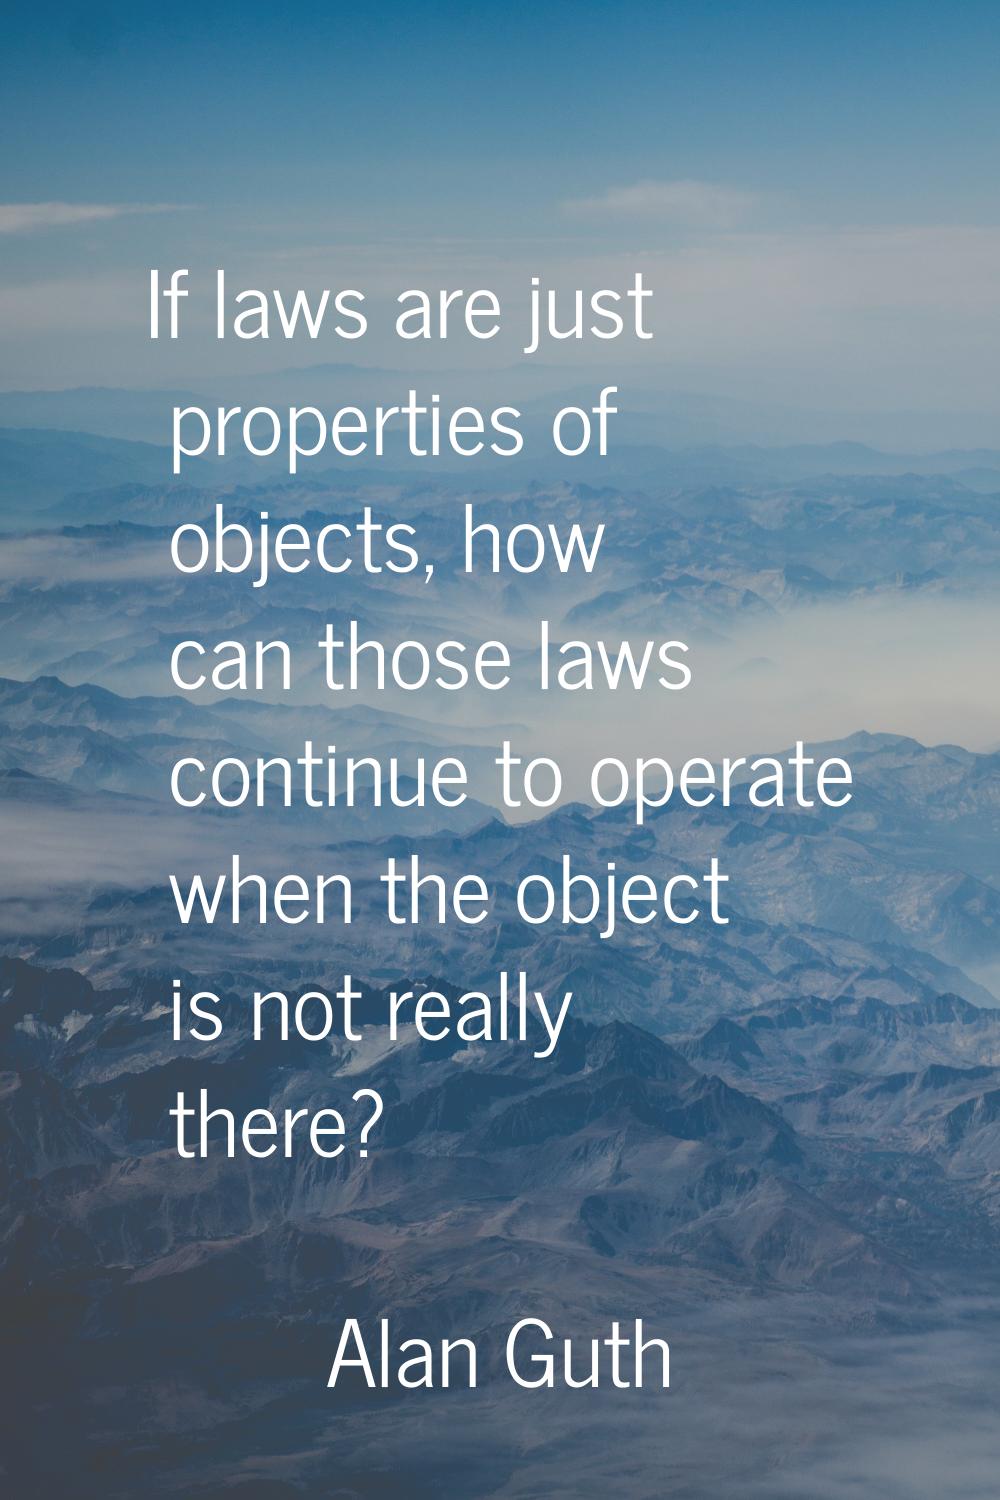 If laws are just properties of objects, how can those laws continue to operate when the object is n